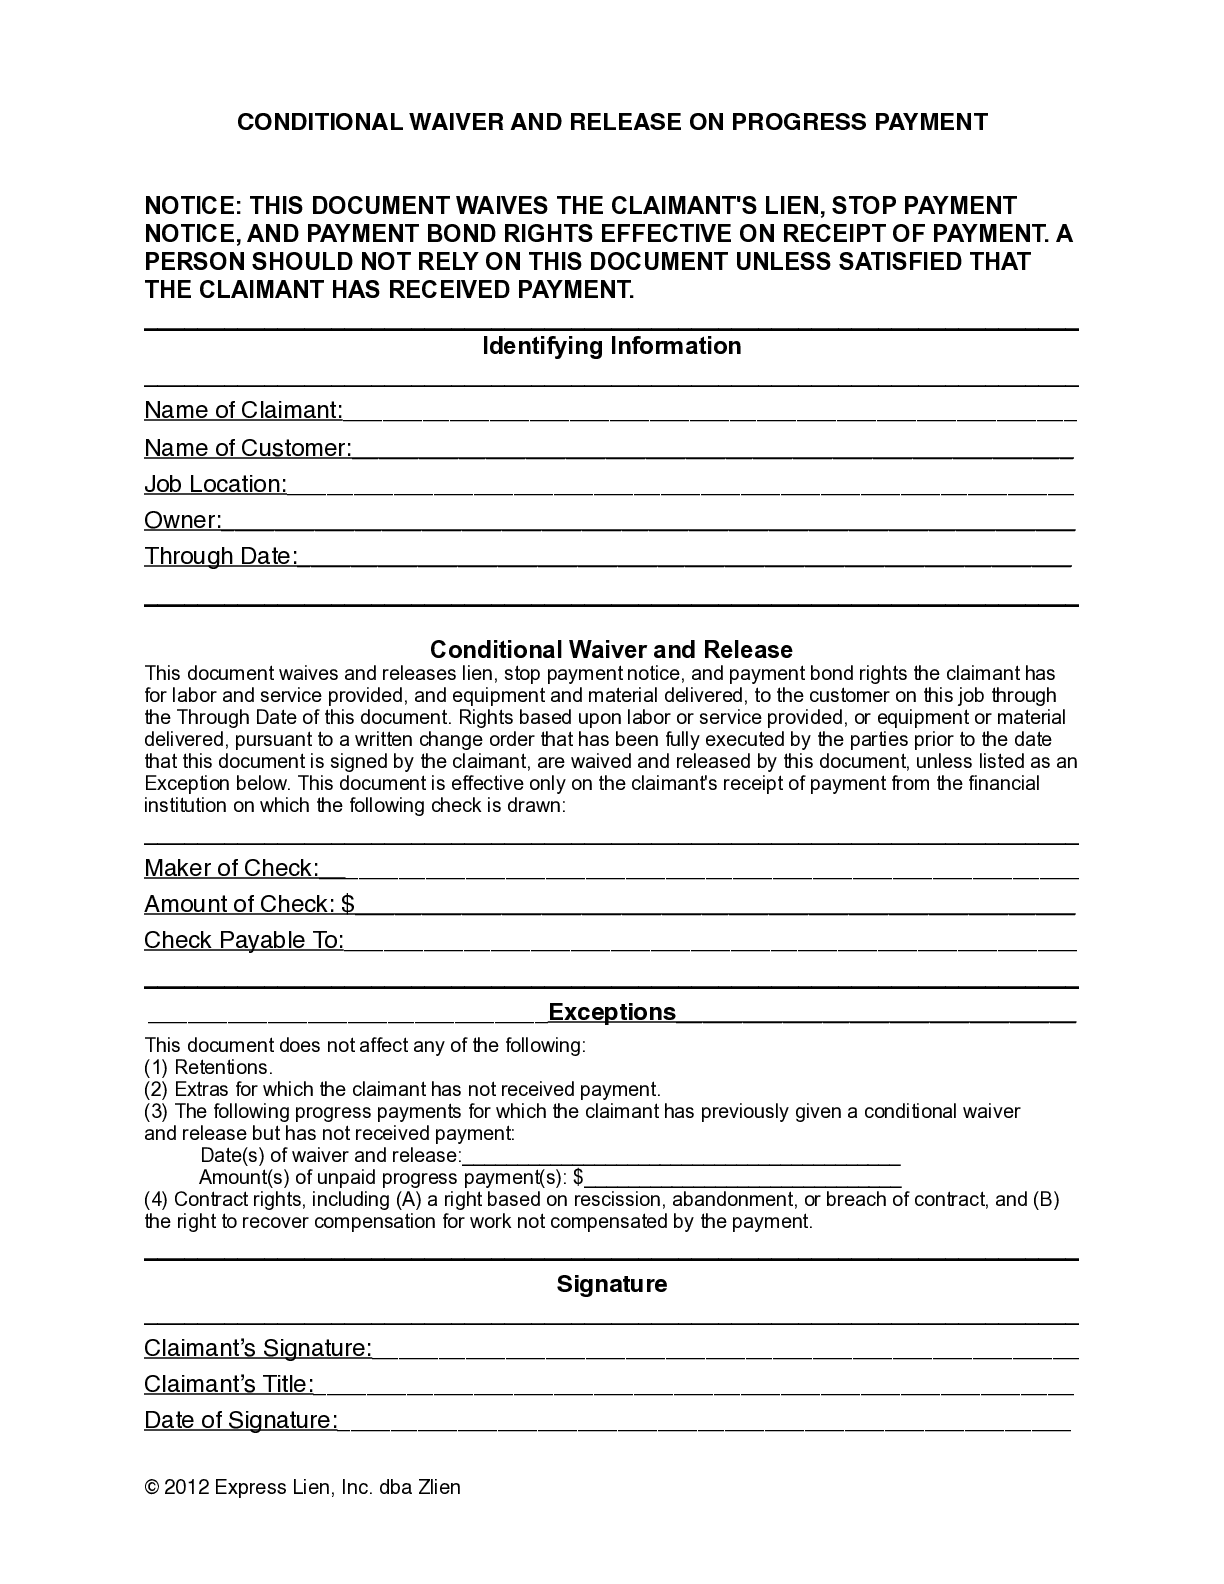 Maryland Partial Conditional Lien Waiver Form - free from